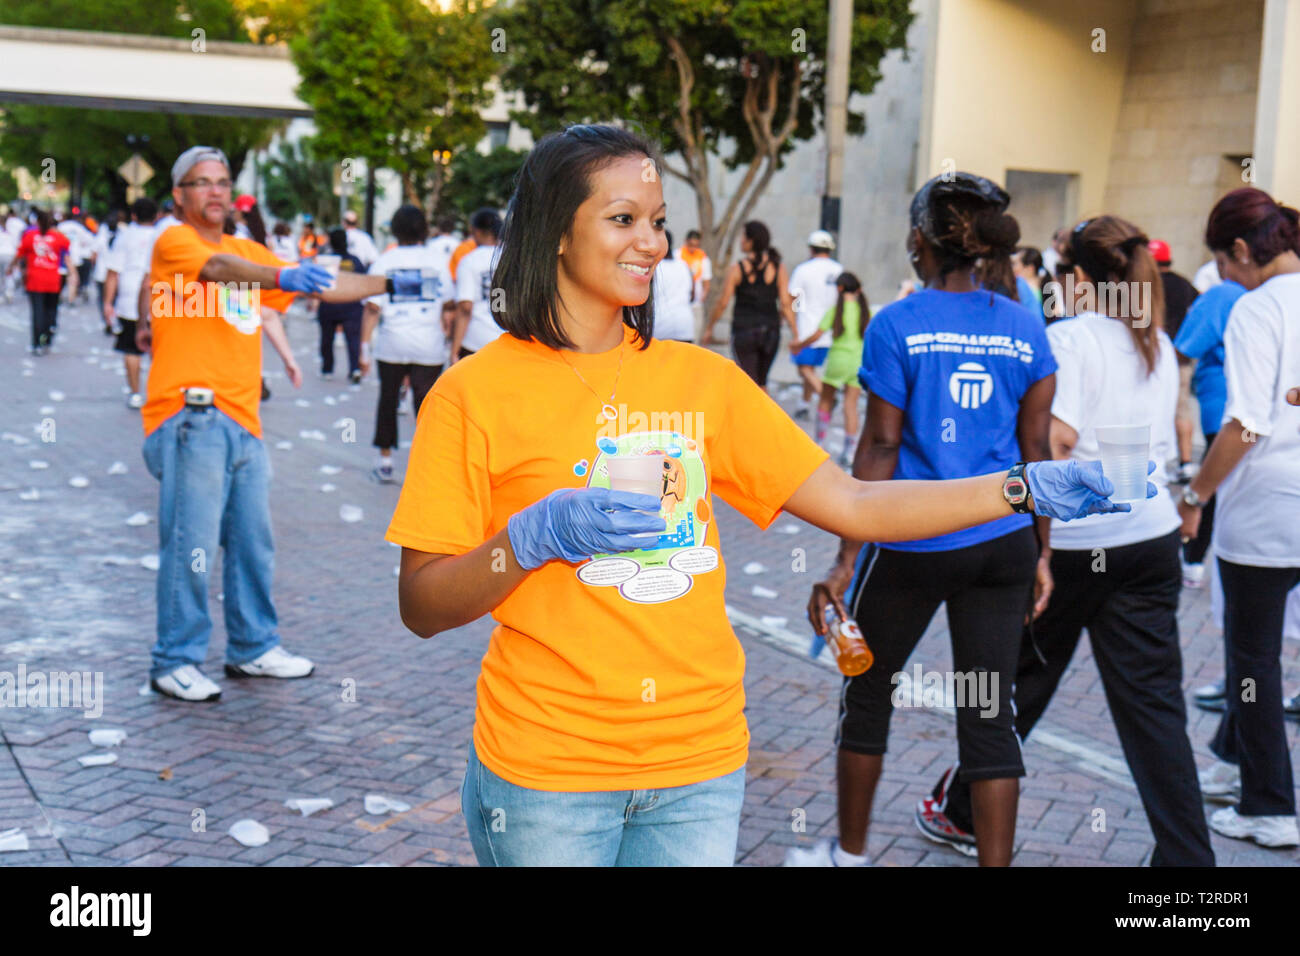 Miami Florida,Bayfront Park,Mercedes Benz Miami Corporate Run,community charity runners,walkers,employee employees working job,co workers,water statio Stock Photo